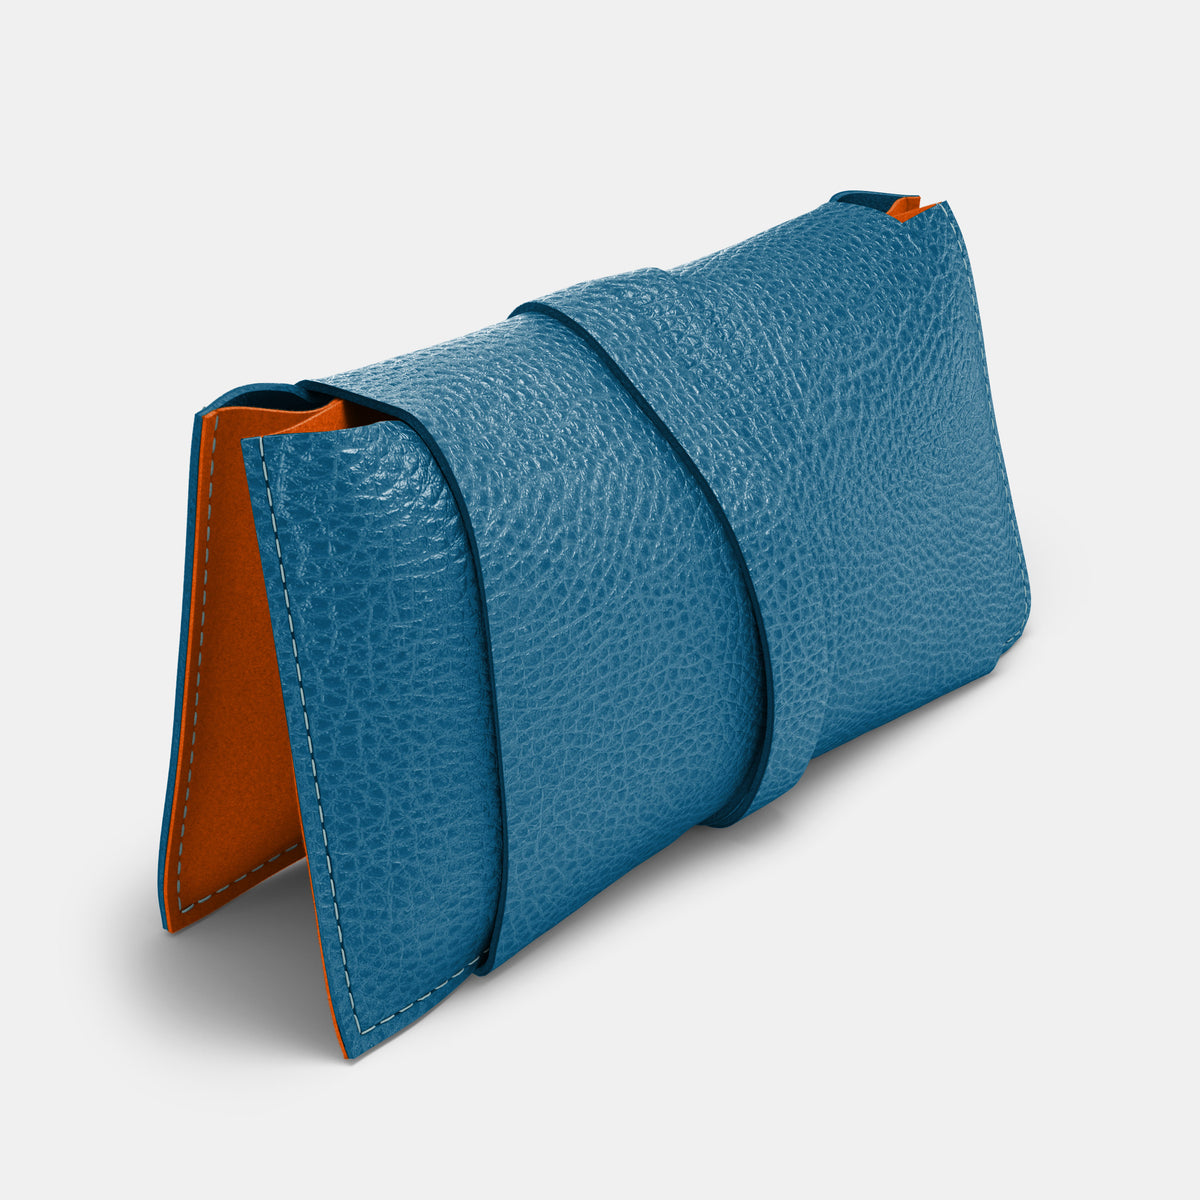 Cable Bag - Turquoise and Orange - RYAN London